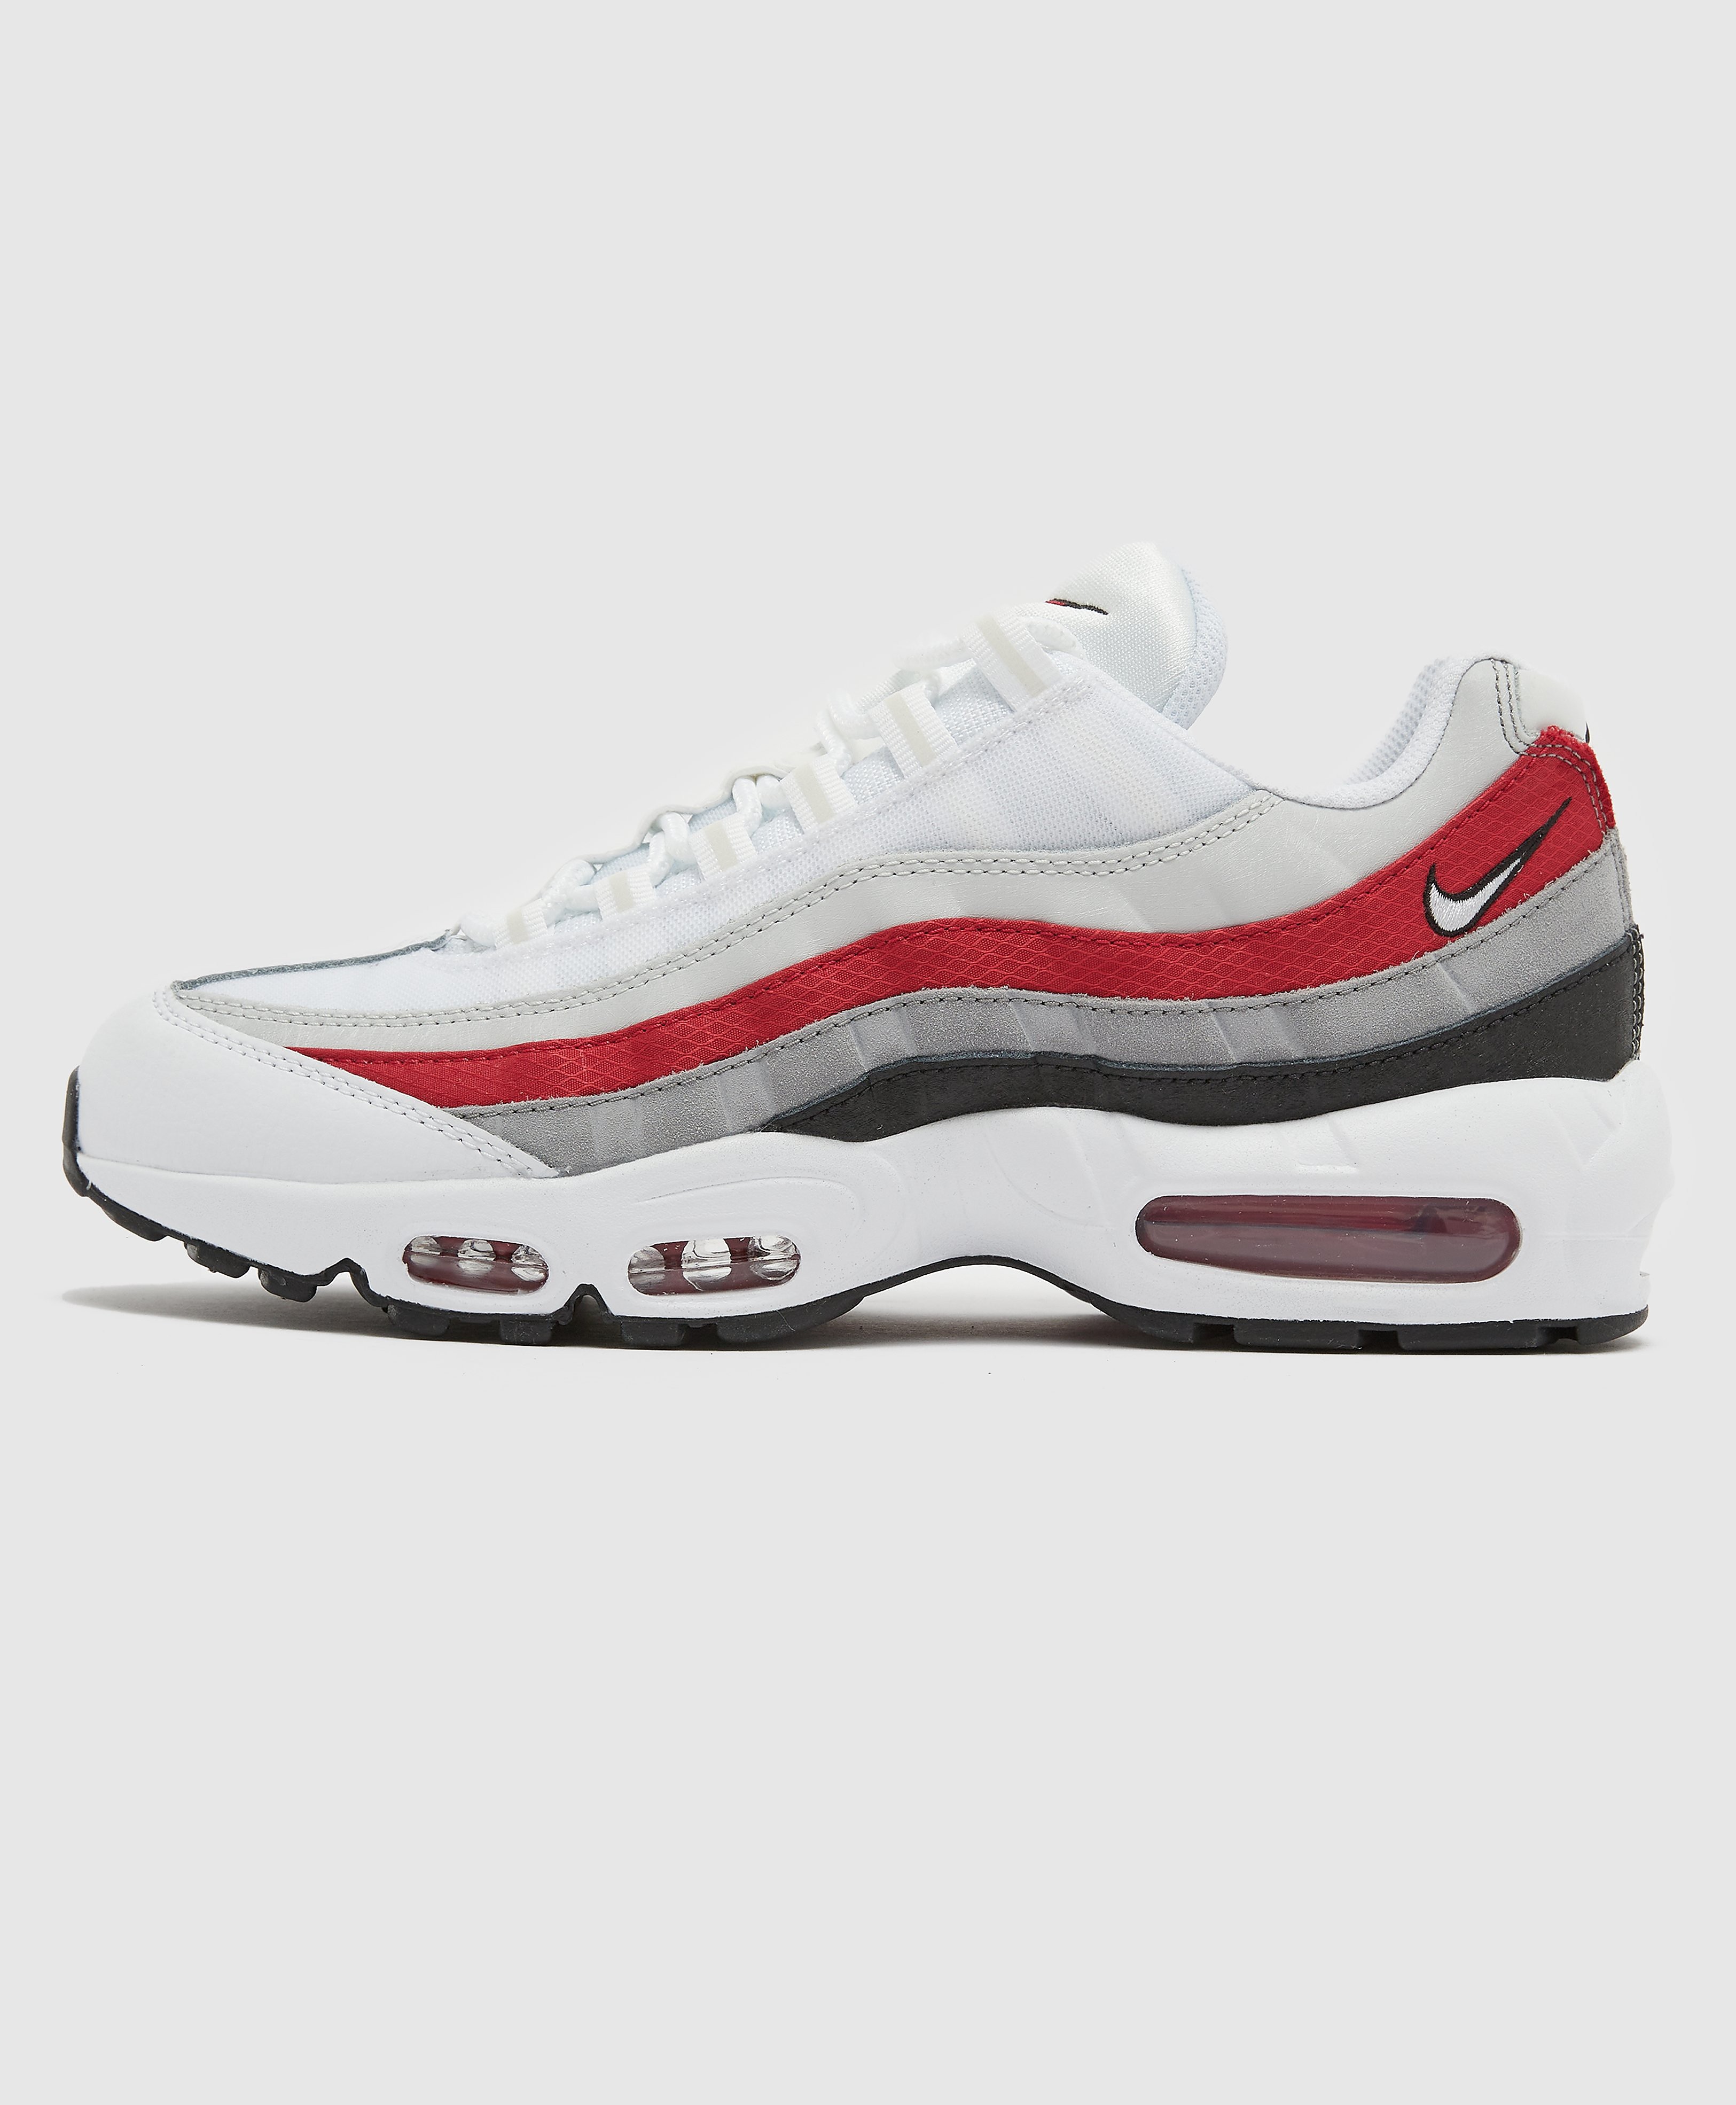 Nike Men's Air Max 95 Trainers - White/Red, White/Red